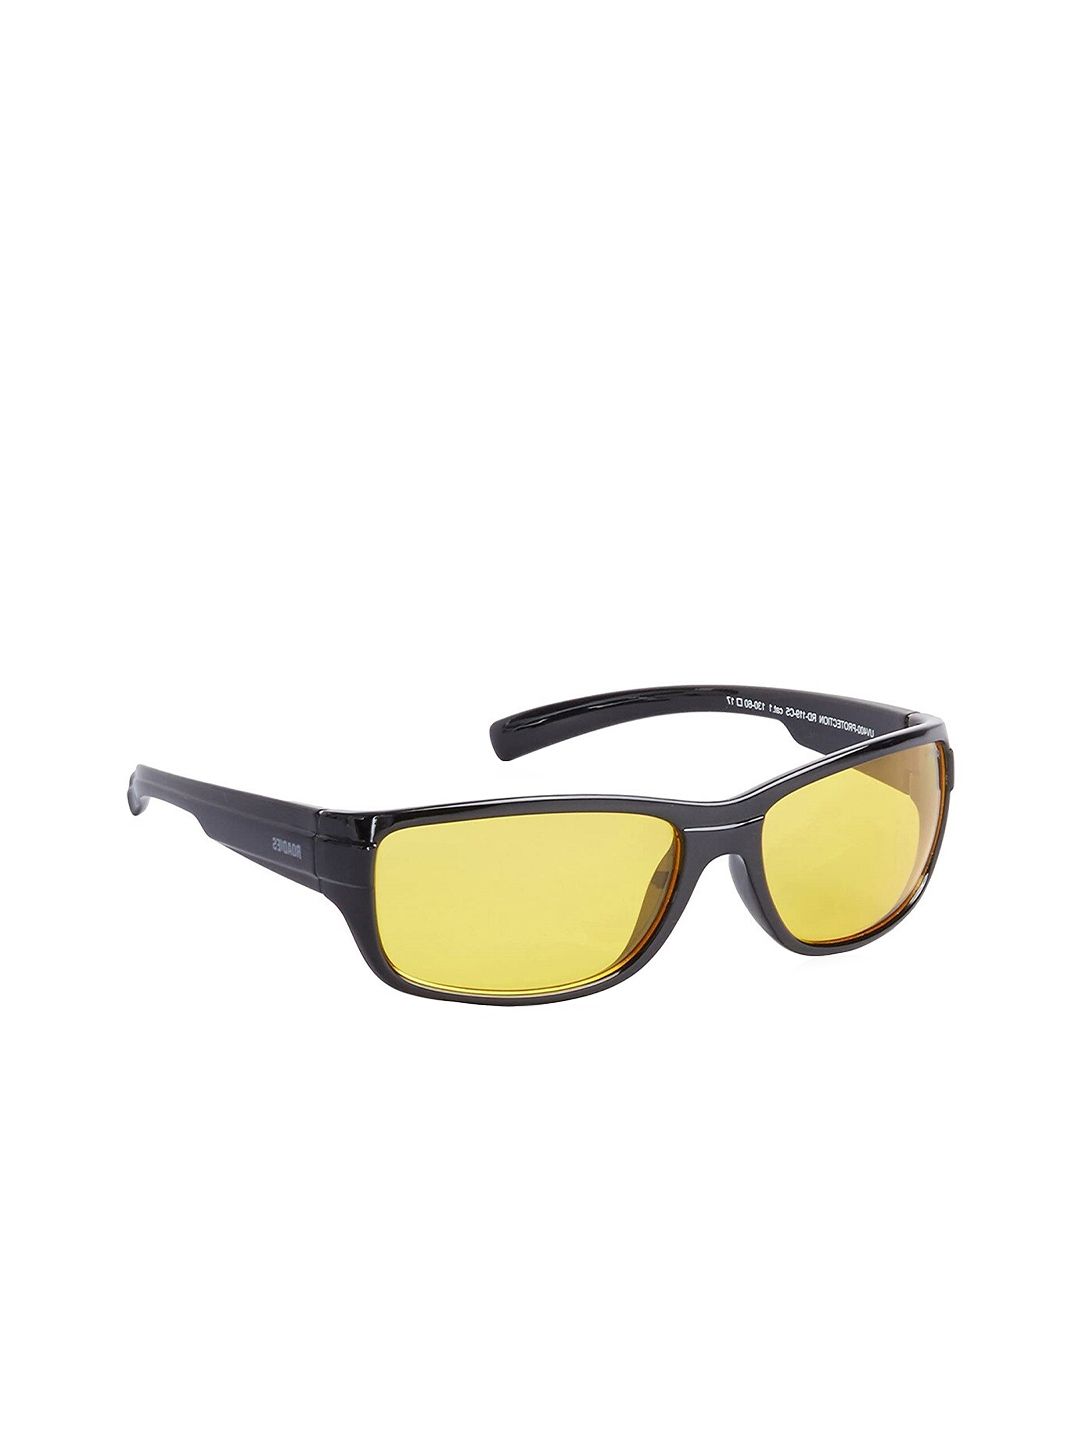 MTV Unisex Yellow Lens & Black Sports Sunglasses with UV Protected Lens Price in India